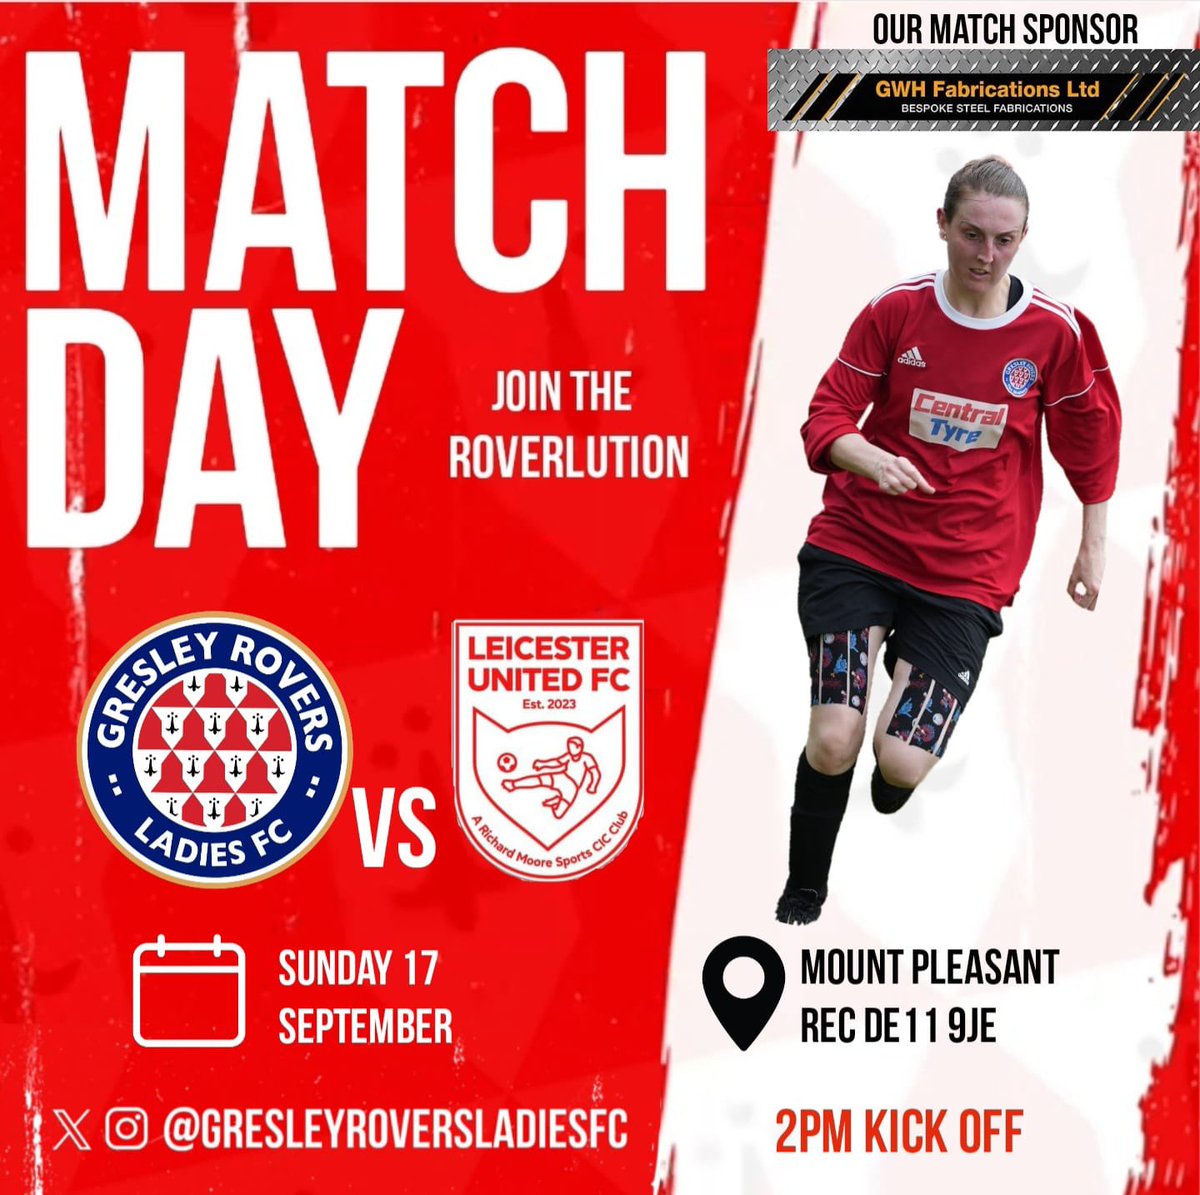 Up and coming this weekend we have our first double header down at The Mount pleasant Gound. Our Cafe will be open selling hot food and drinks. Please pop along and support the ladies 🔴⚪️